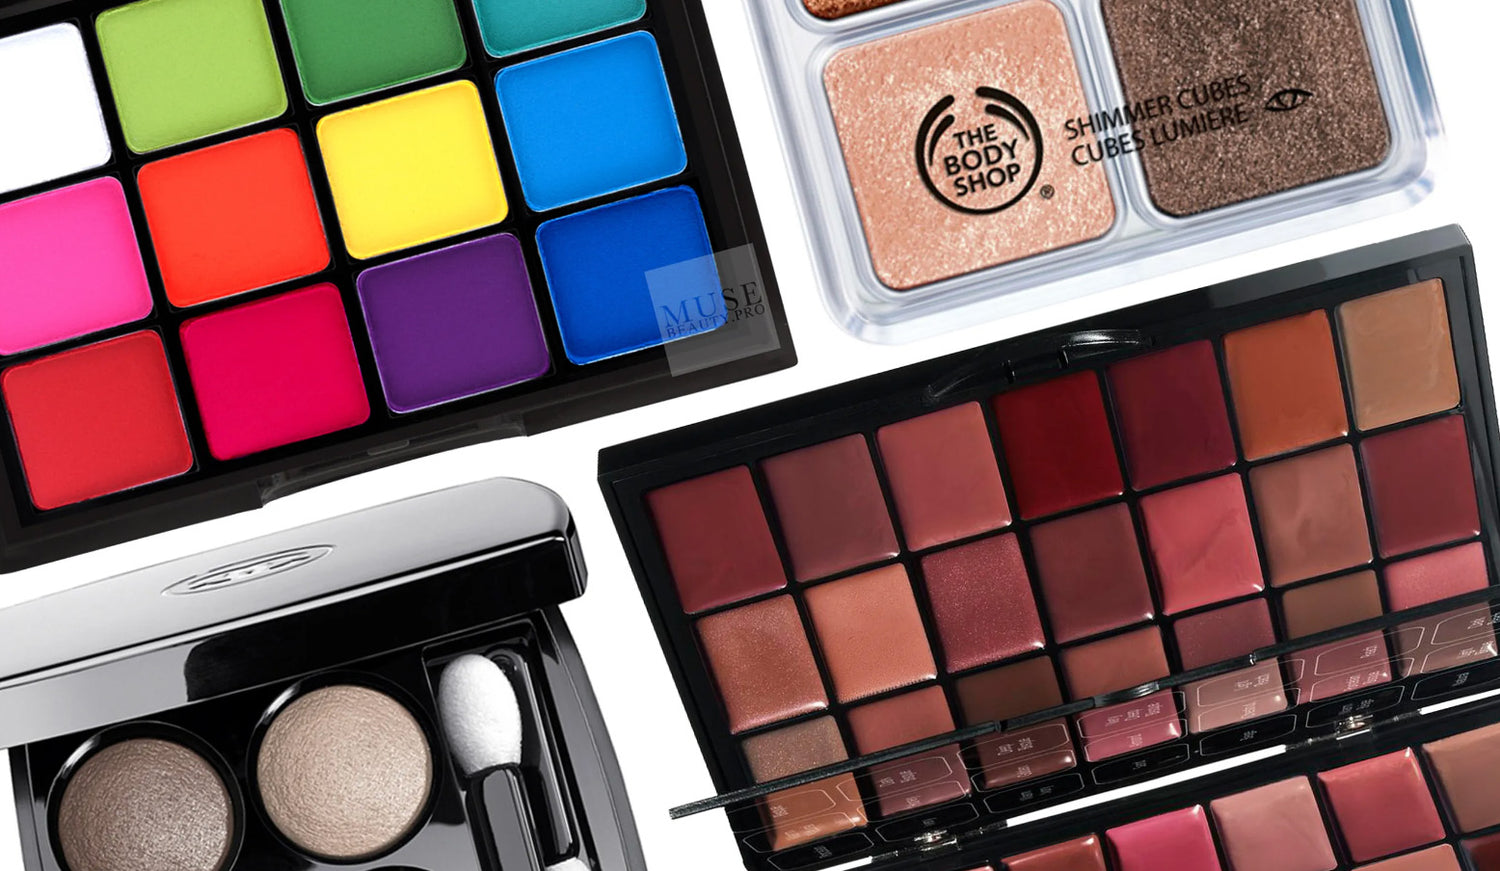 10 Under-The-Radar Palettes That Every Makeup Junkie Needs